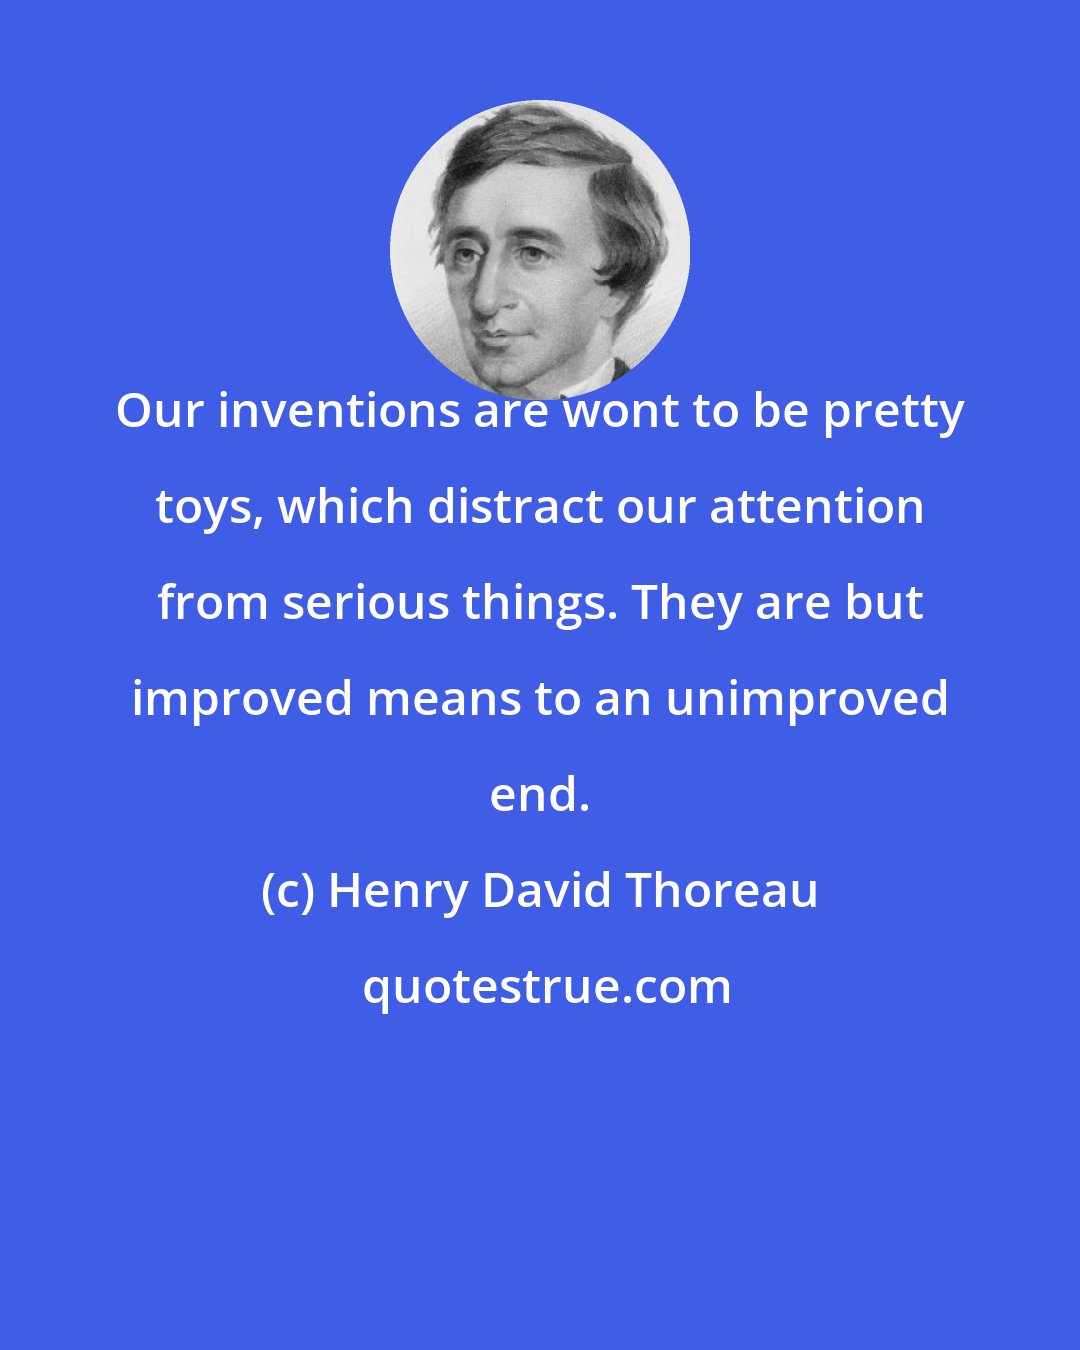 Henry David Thoreau: Our inventions are wont to be pretty toys, which distract our attention from serious things. They are but improved means to an unimproved end.